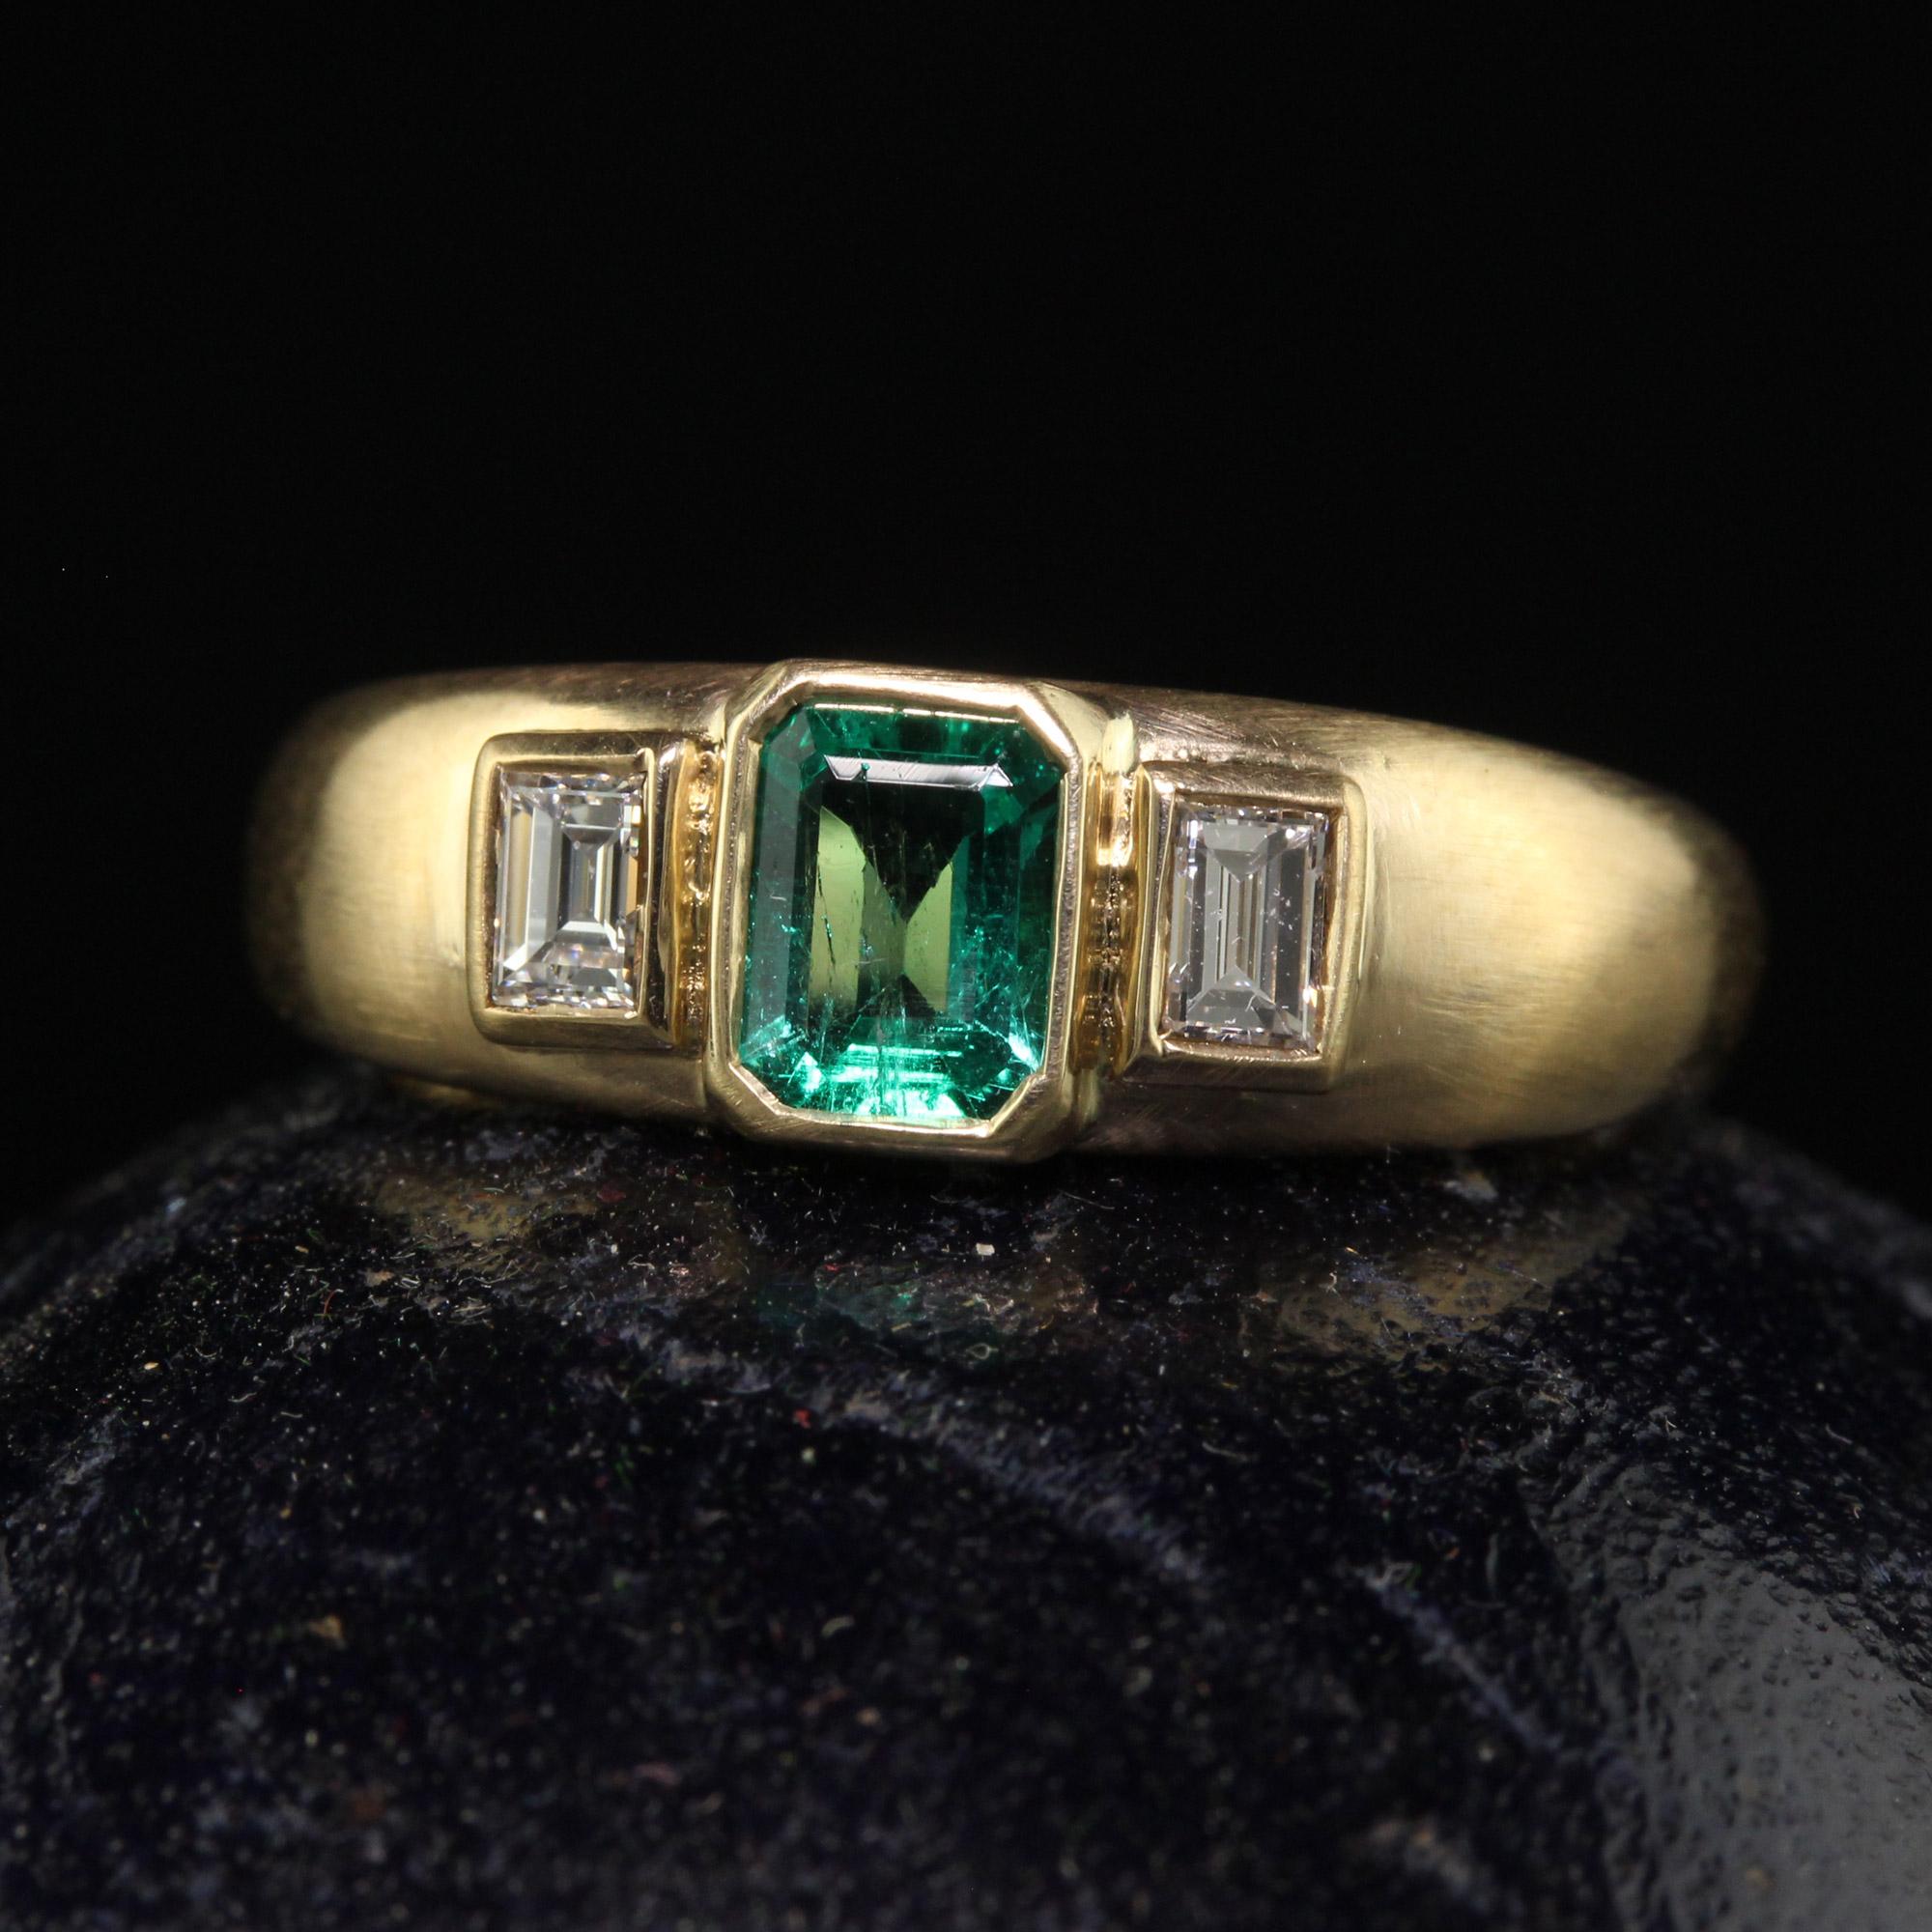 Beautiful Vintage Retro French 18K Yellow Gold Colombian Emerald Diamond Three Stone Ring. This gorgeous vintage French retro three stone ring is crafted in 18k yellow gold. The center holds a natural Colombian emerald and has two beautiful old cut